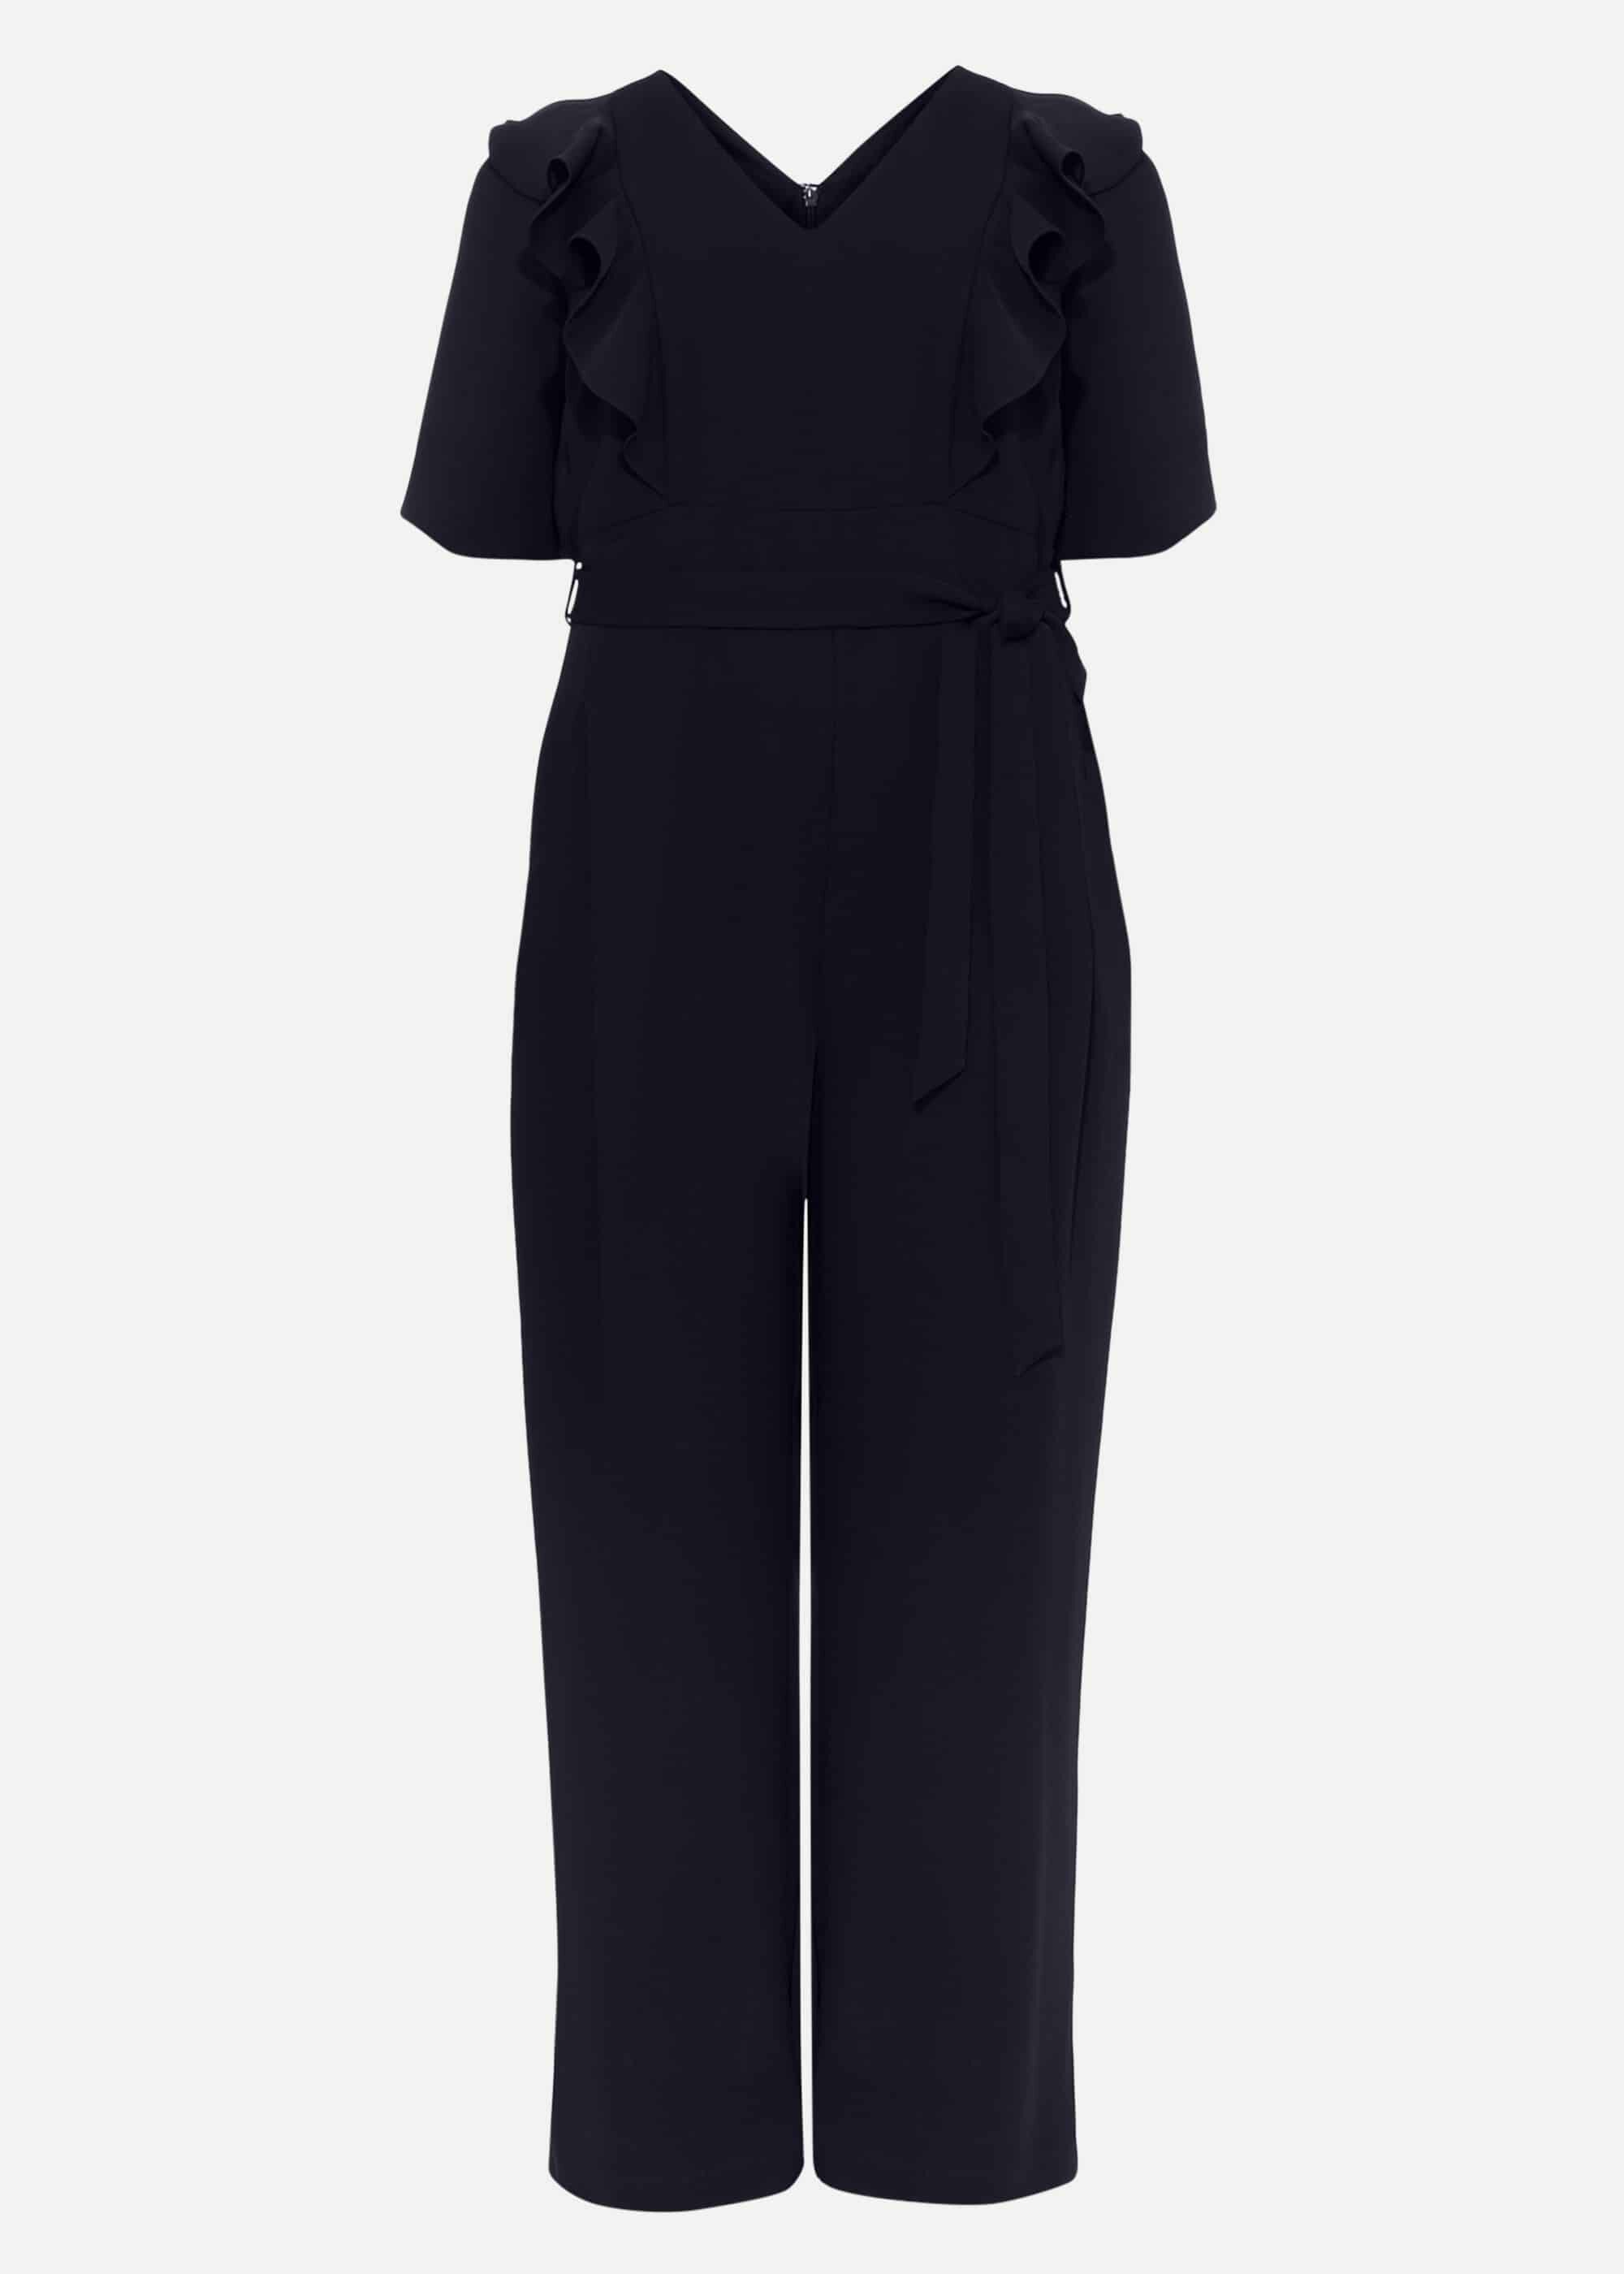 Studio 8 s Marianna Frill Jumpsuit in Navy Womens Clothing Jumpsuits and rompers Full-length jumpsuits and rompers Blue 